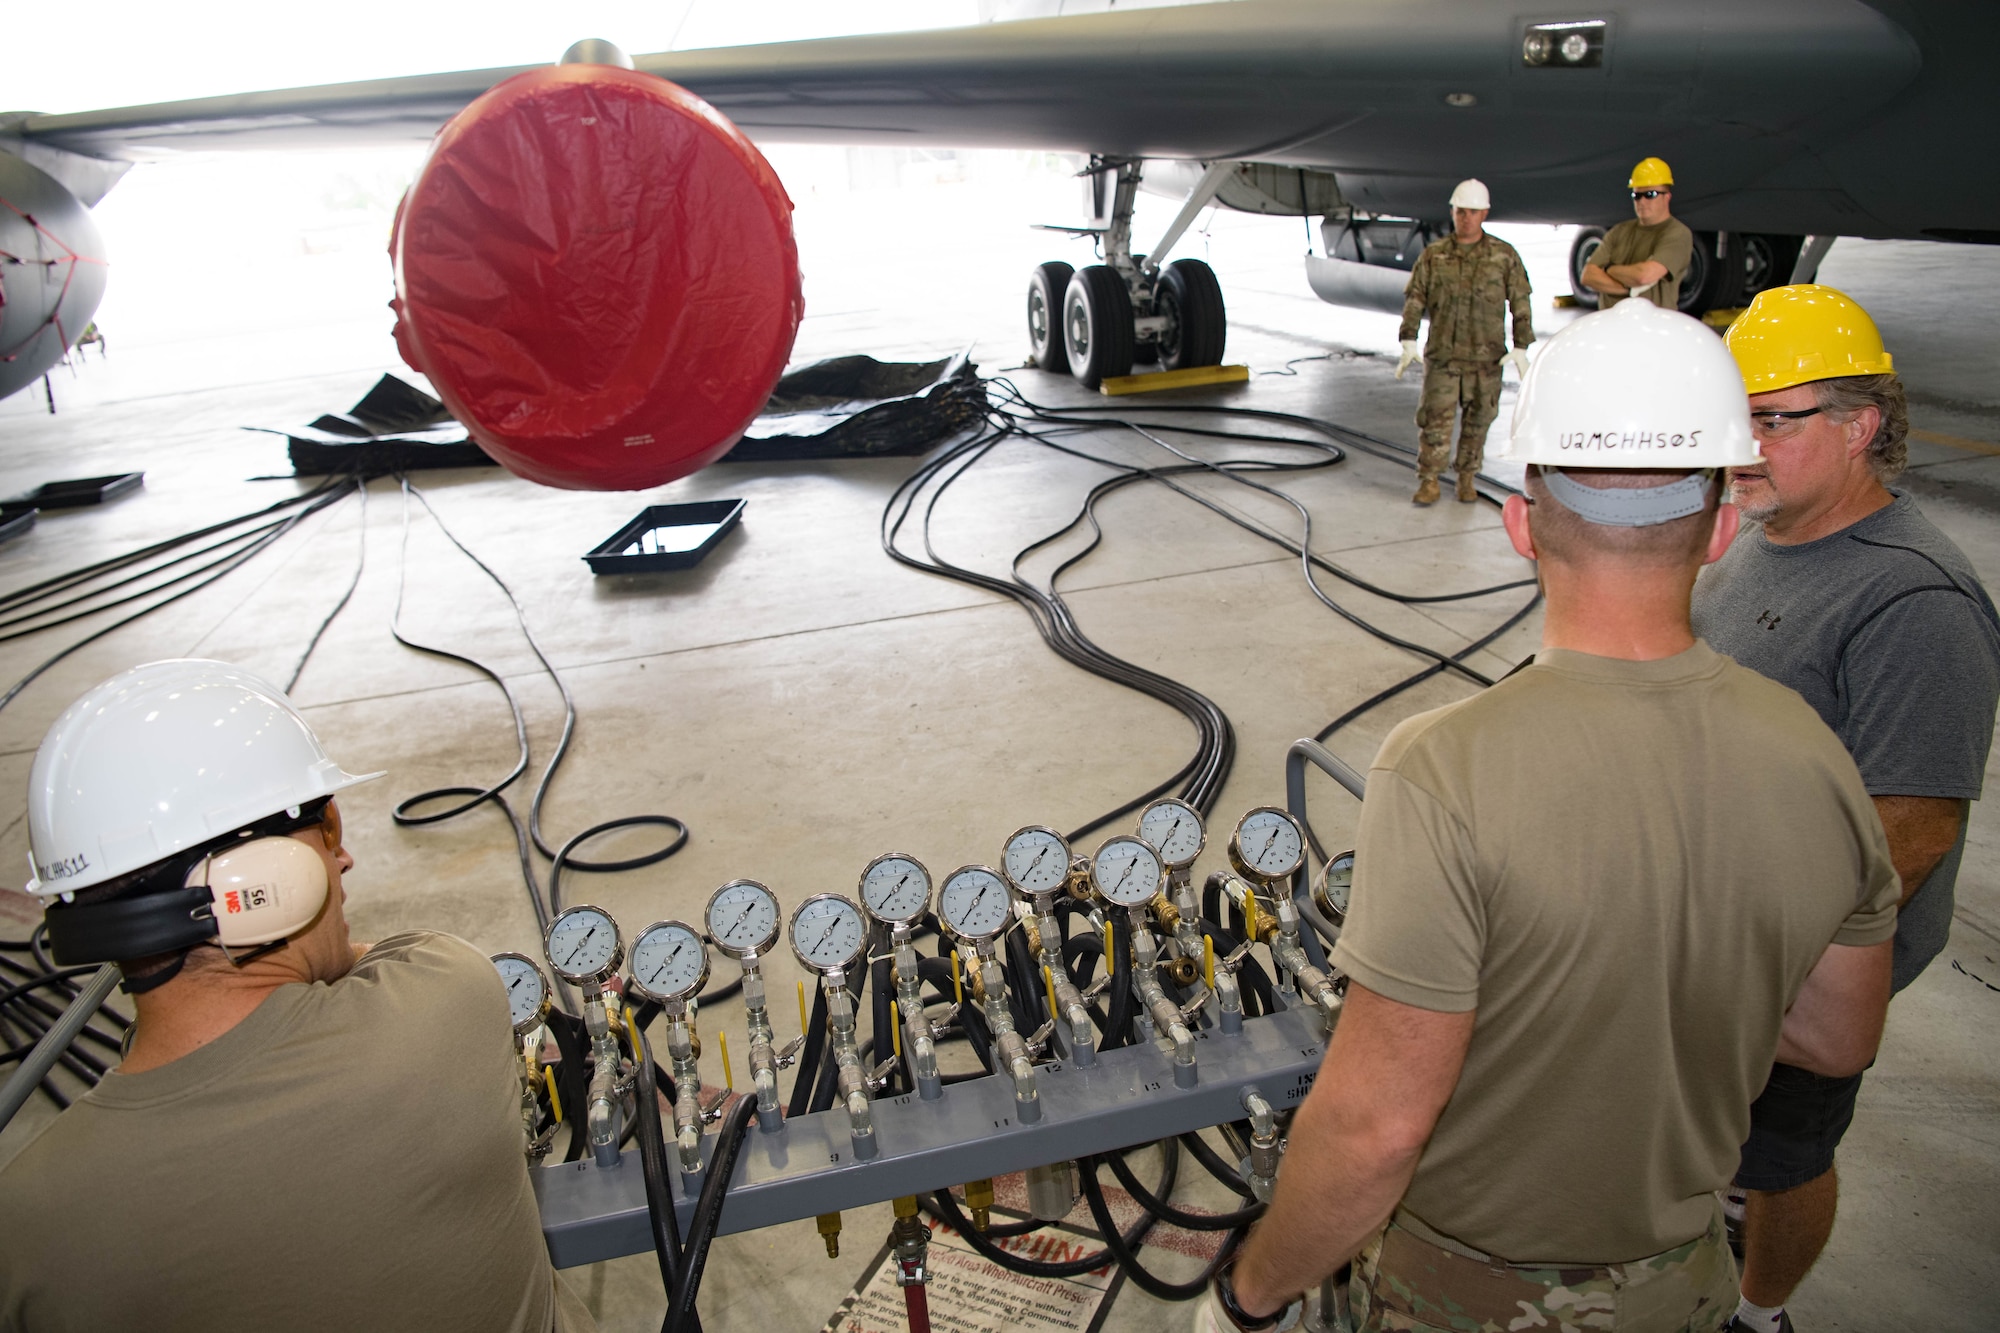 Airmen assigned to the 434th Maintenance Squadron participate in the CDDAR exercise at Grissom Air Reserve Base, Indiana, July 30, 2021. This exercise is designed to demonstrate the 434th MXS's ability to respond to a major aircraft accident within a certain time frame. (U.S. Air Force photo by Staff Sgt. Jeremy Blocker)